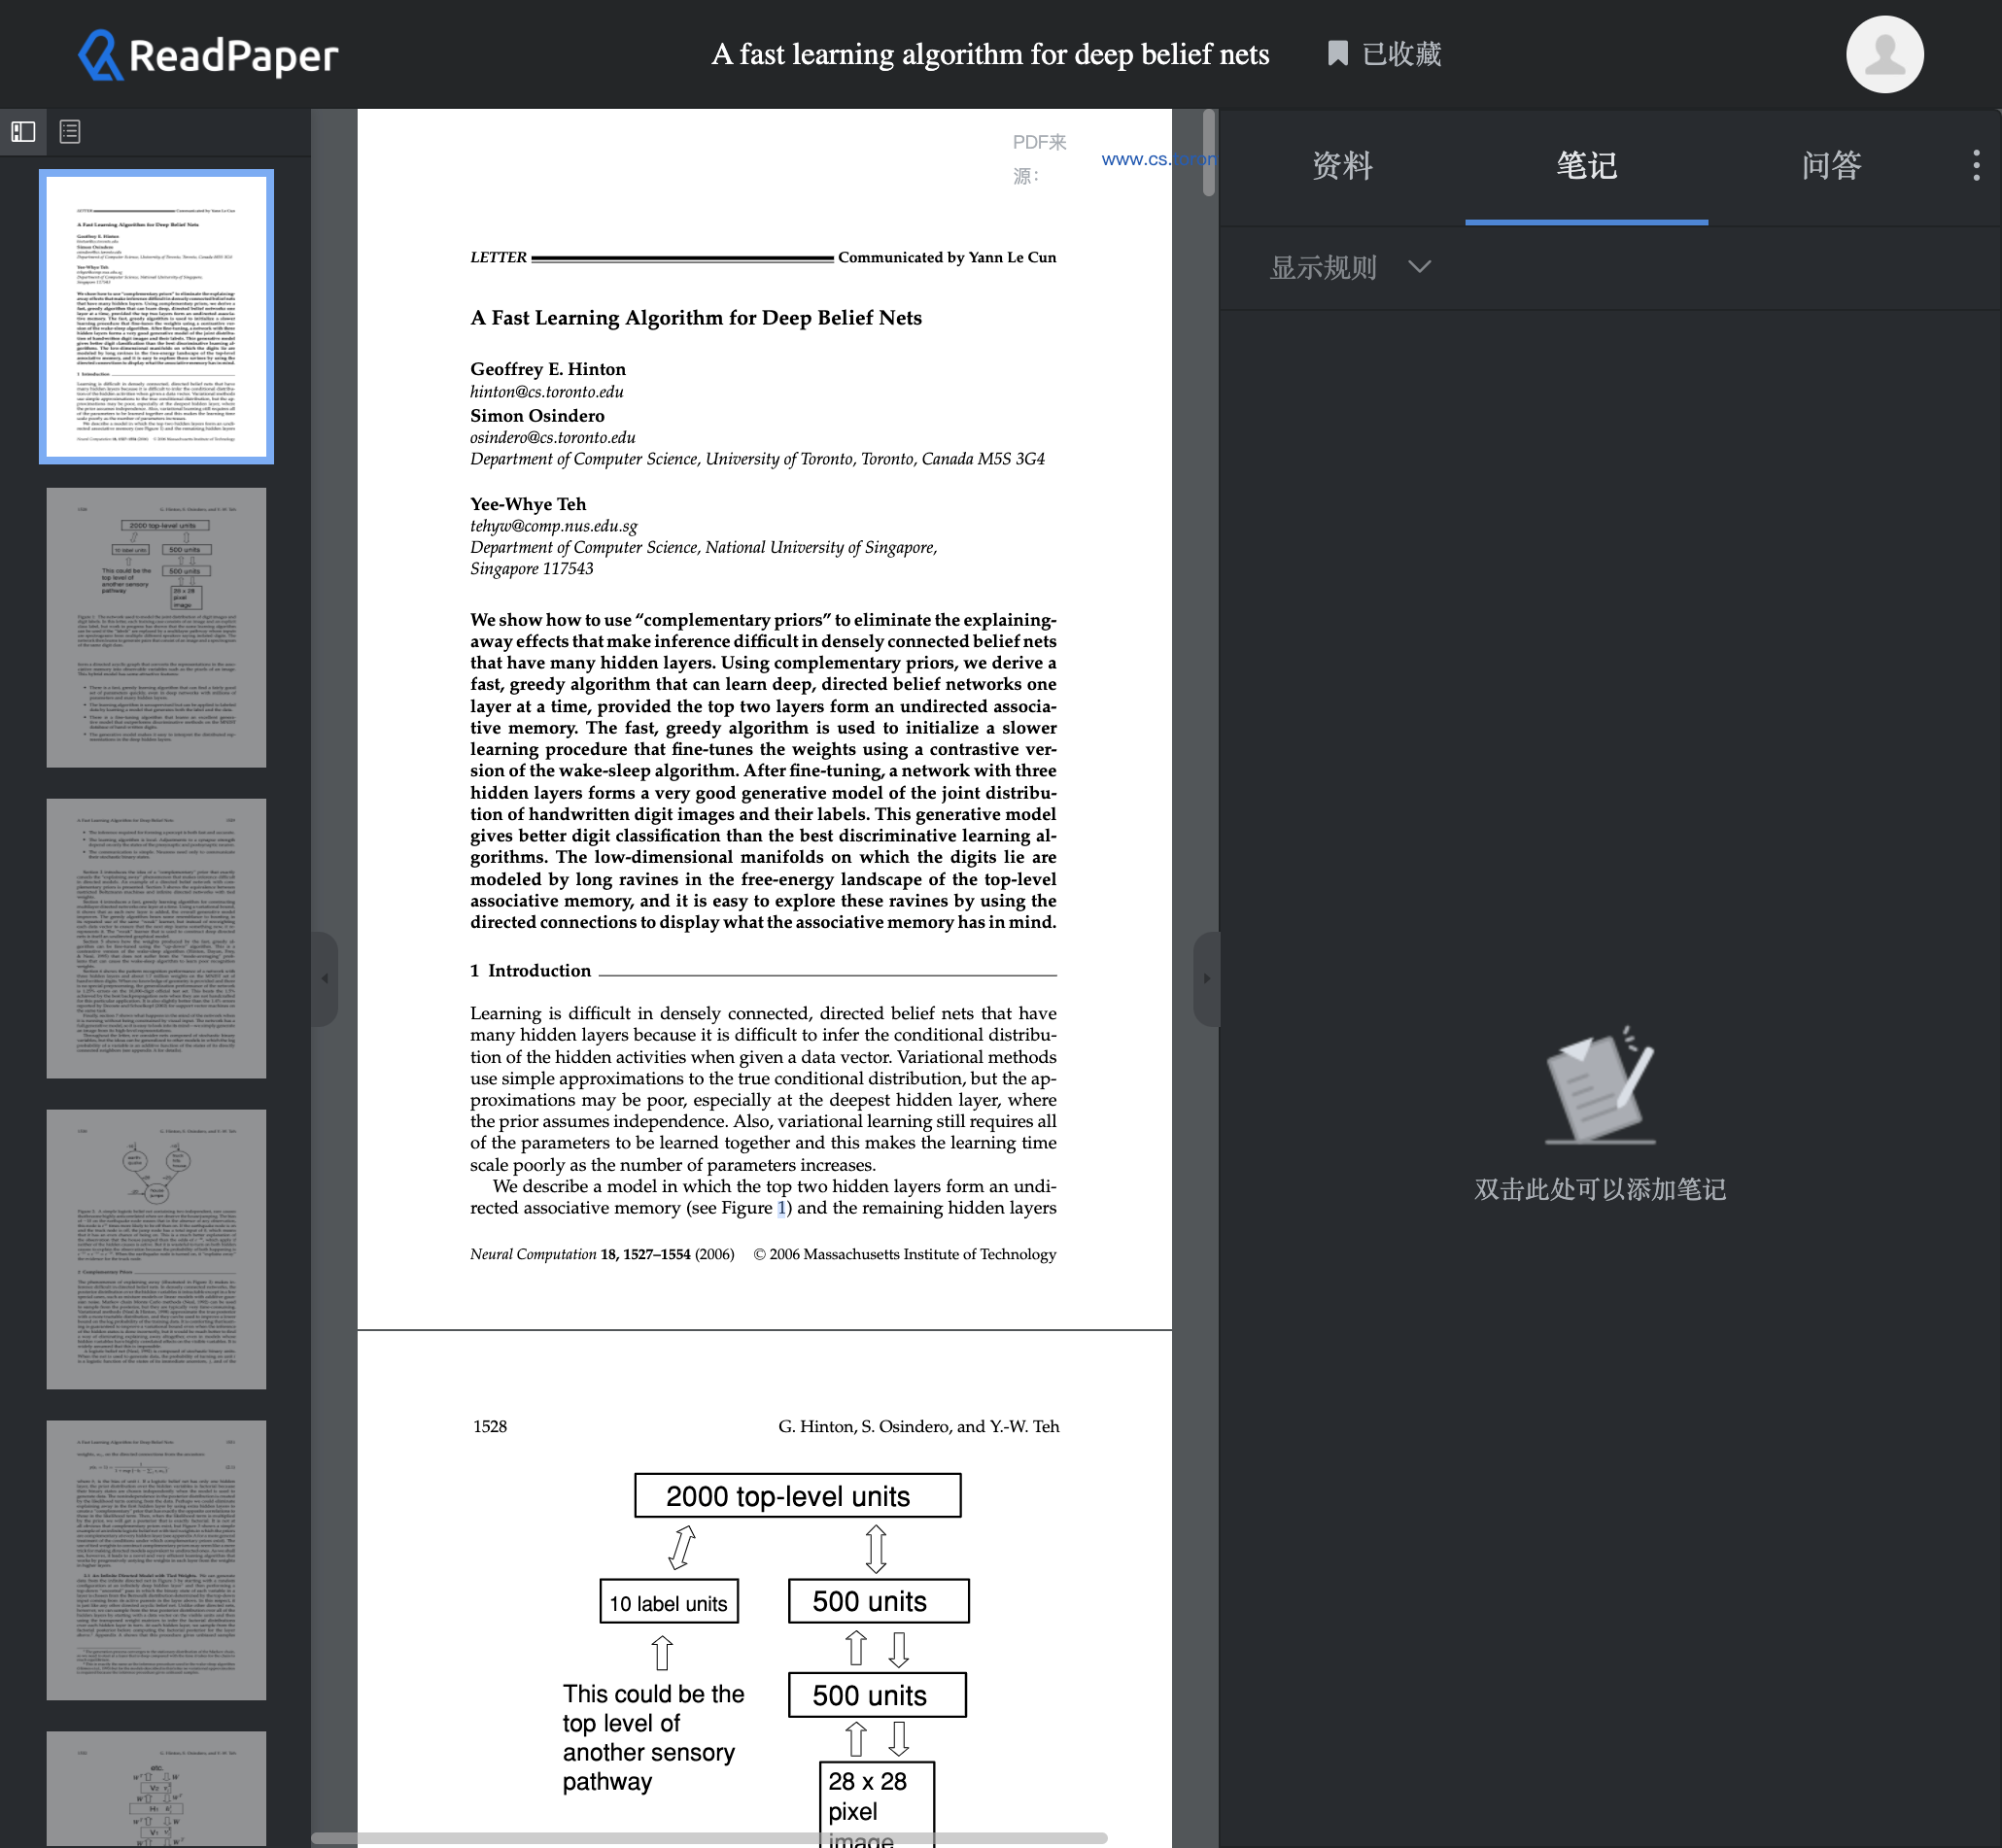 software for reading research papers